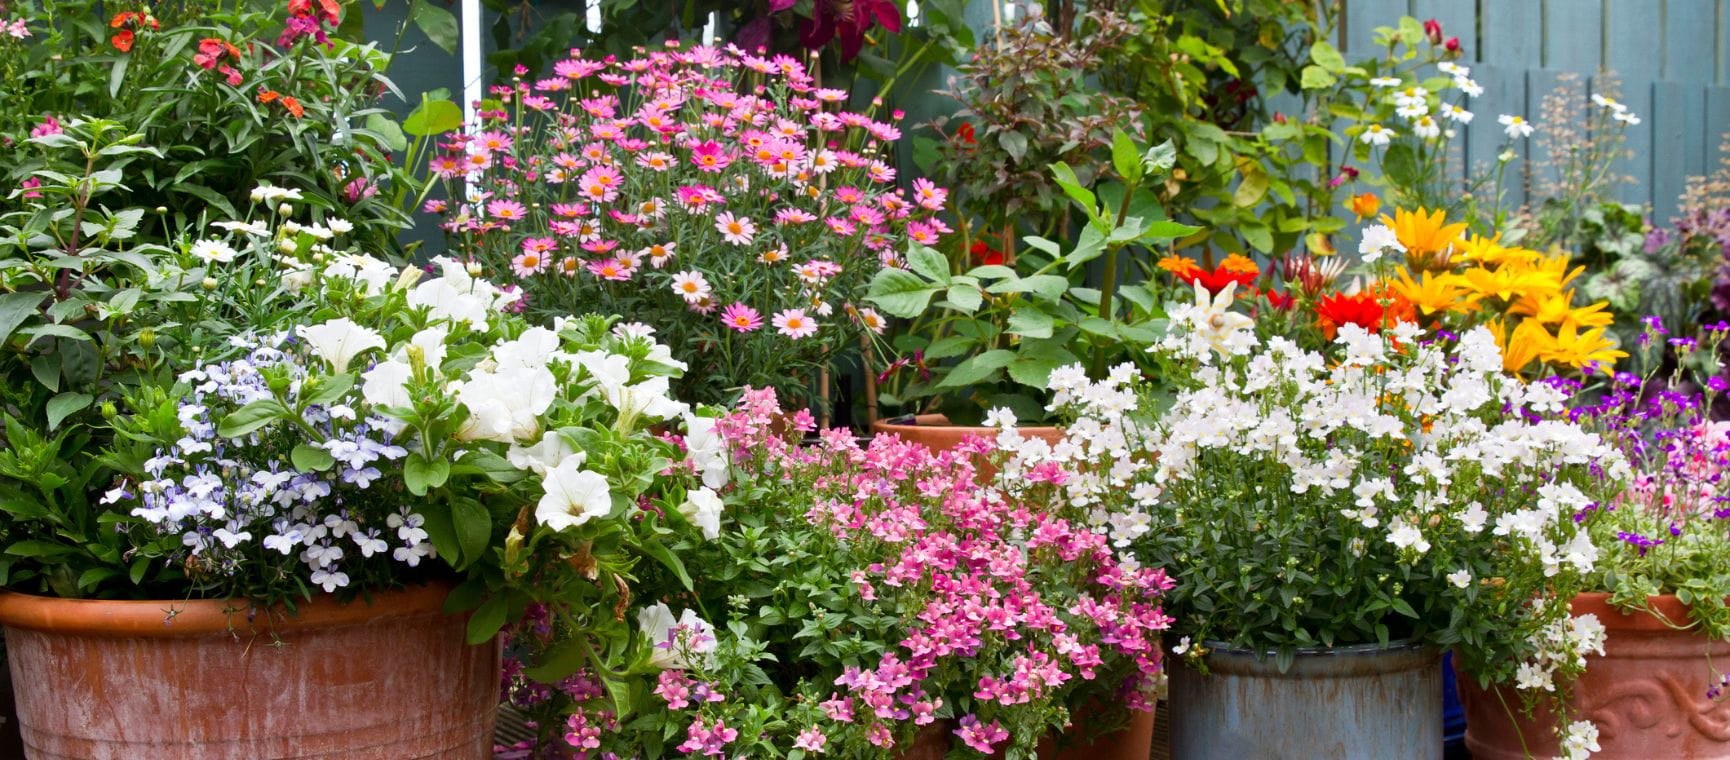 A colourful display of flowers in pots against a blue painted wooden fence